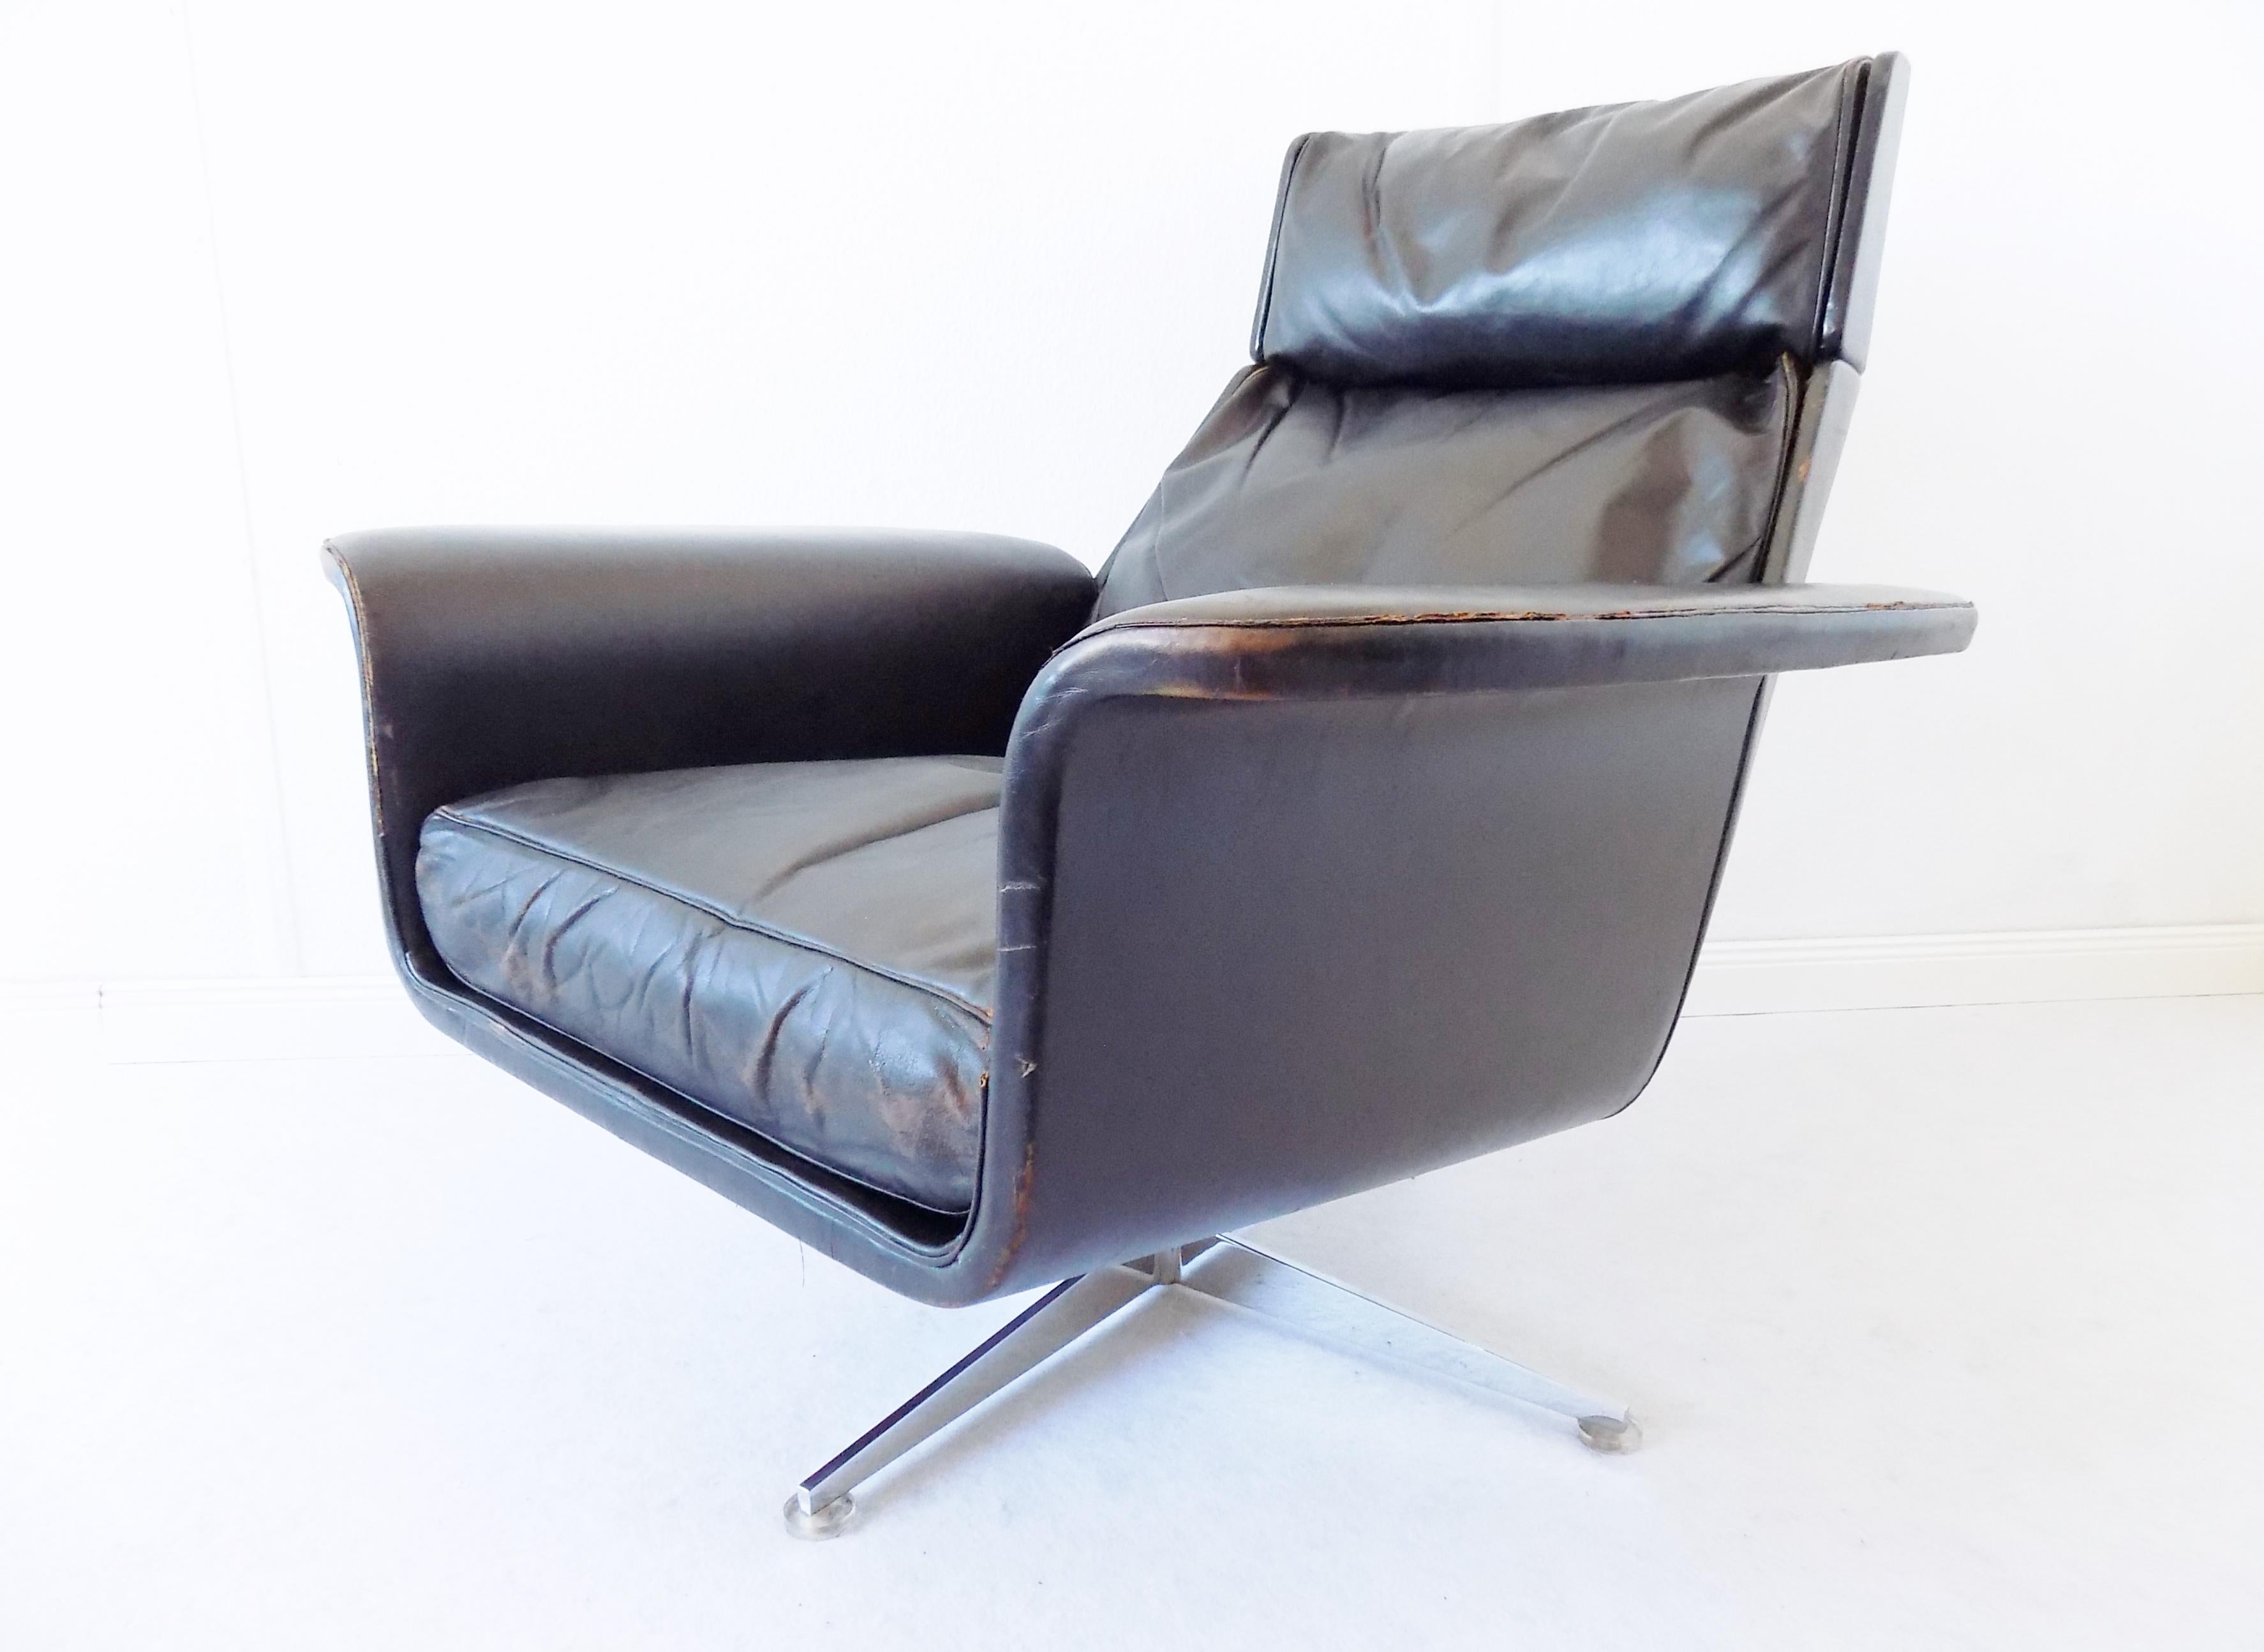 Hans Kaufeld was a German Designer who founded his company in 1918 producing furniture to the highest quality level. Kaufeld delivered their chairs also to the chancellors office in the 1960s. This Siesta 62 chair was designed in the early 1960s